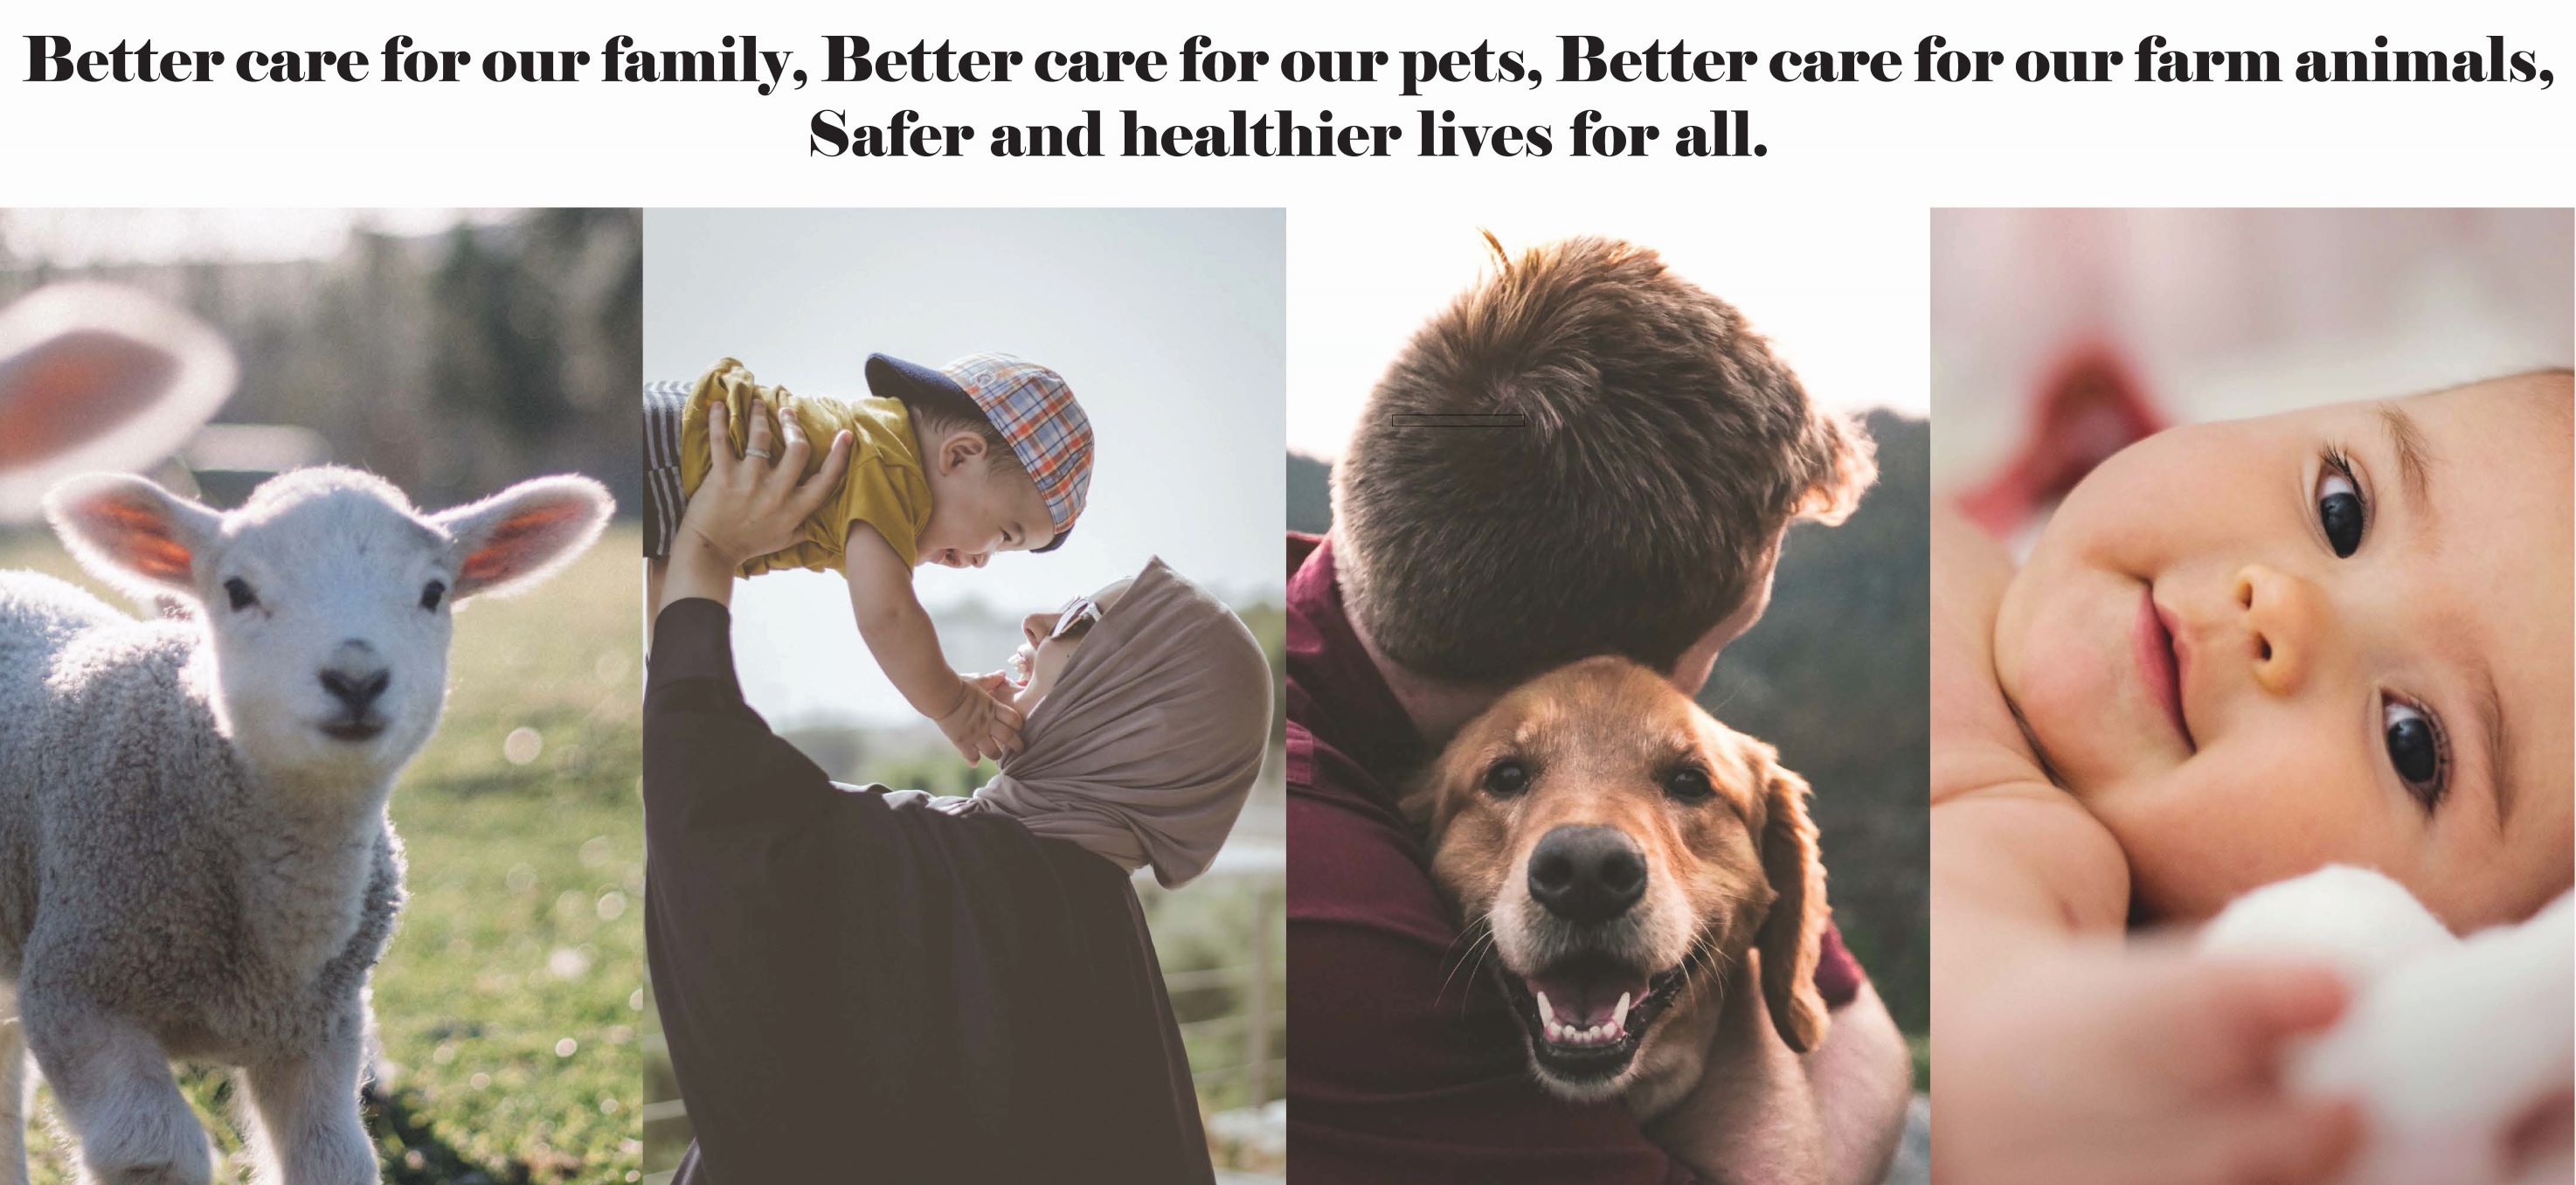 Photos of animals and humans. Graphic reads: Better care for our family, Better care for our pets, Better care for our farm animals, Safer and healthier lives for all.